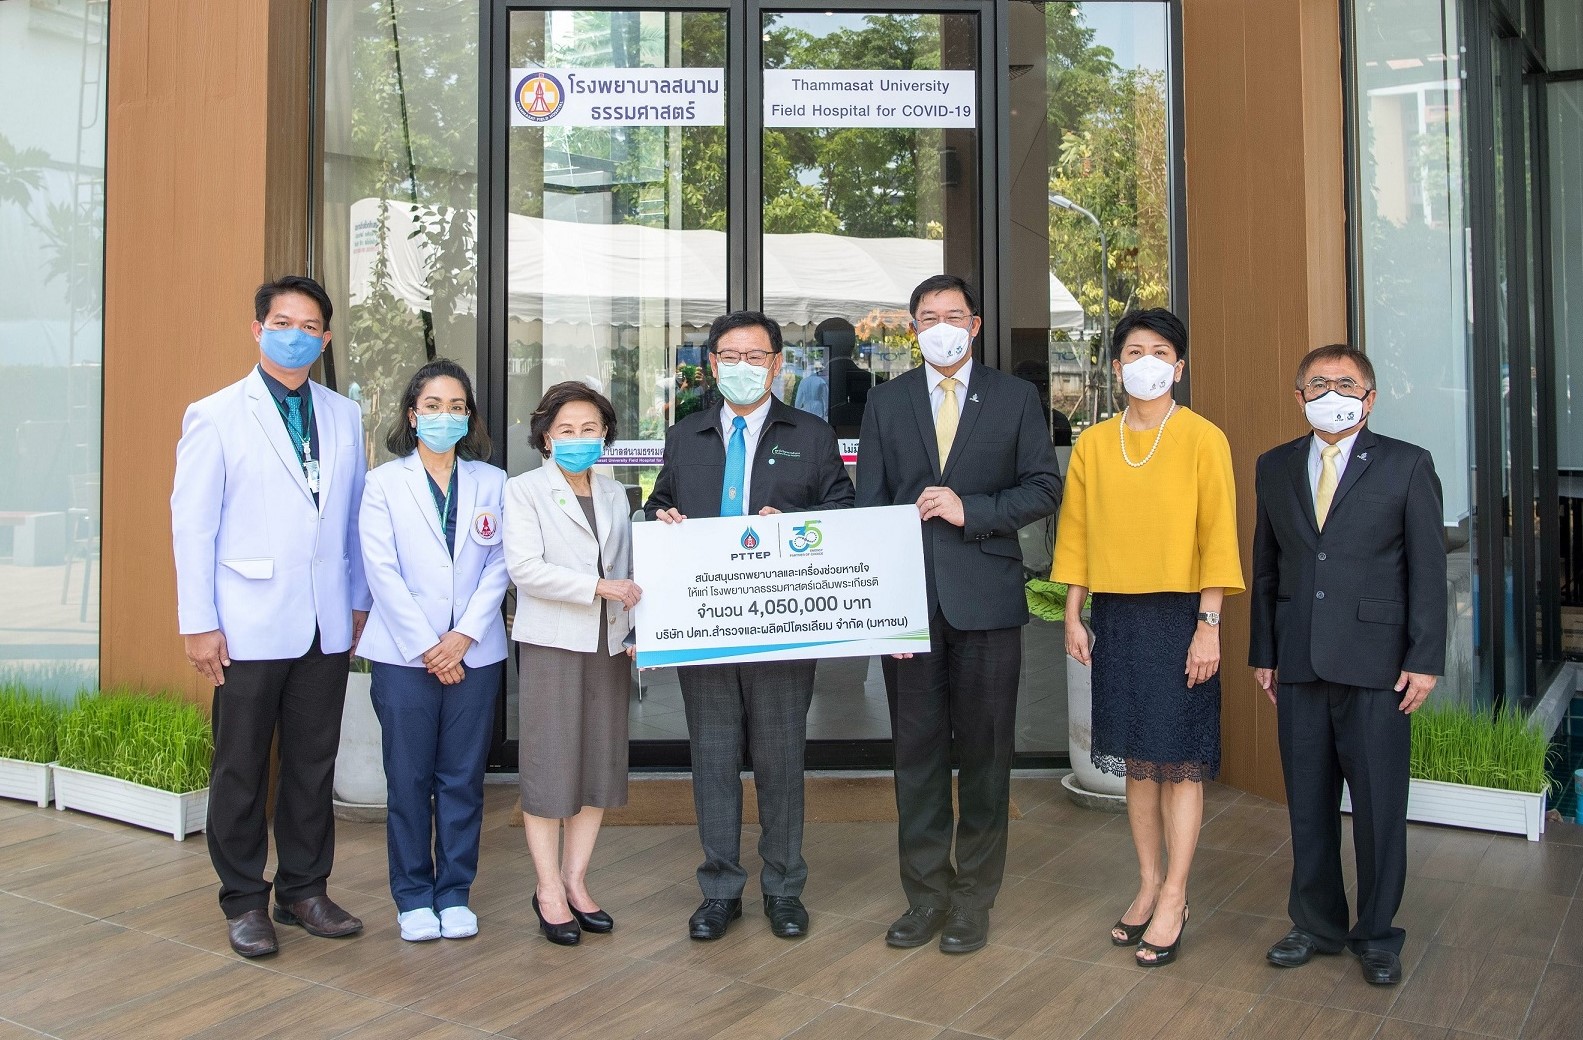 Photo Release: PTTEP funds Thammasat University Hospitals purchase of Ambulance and Ventilator amid COVID-19 pandemic